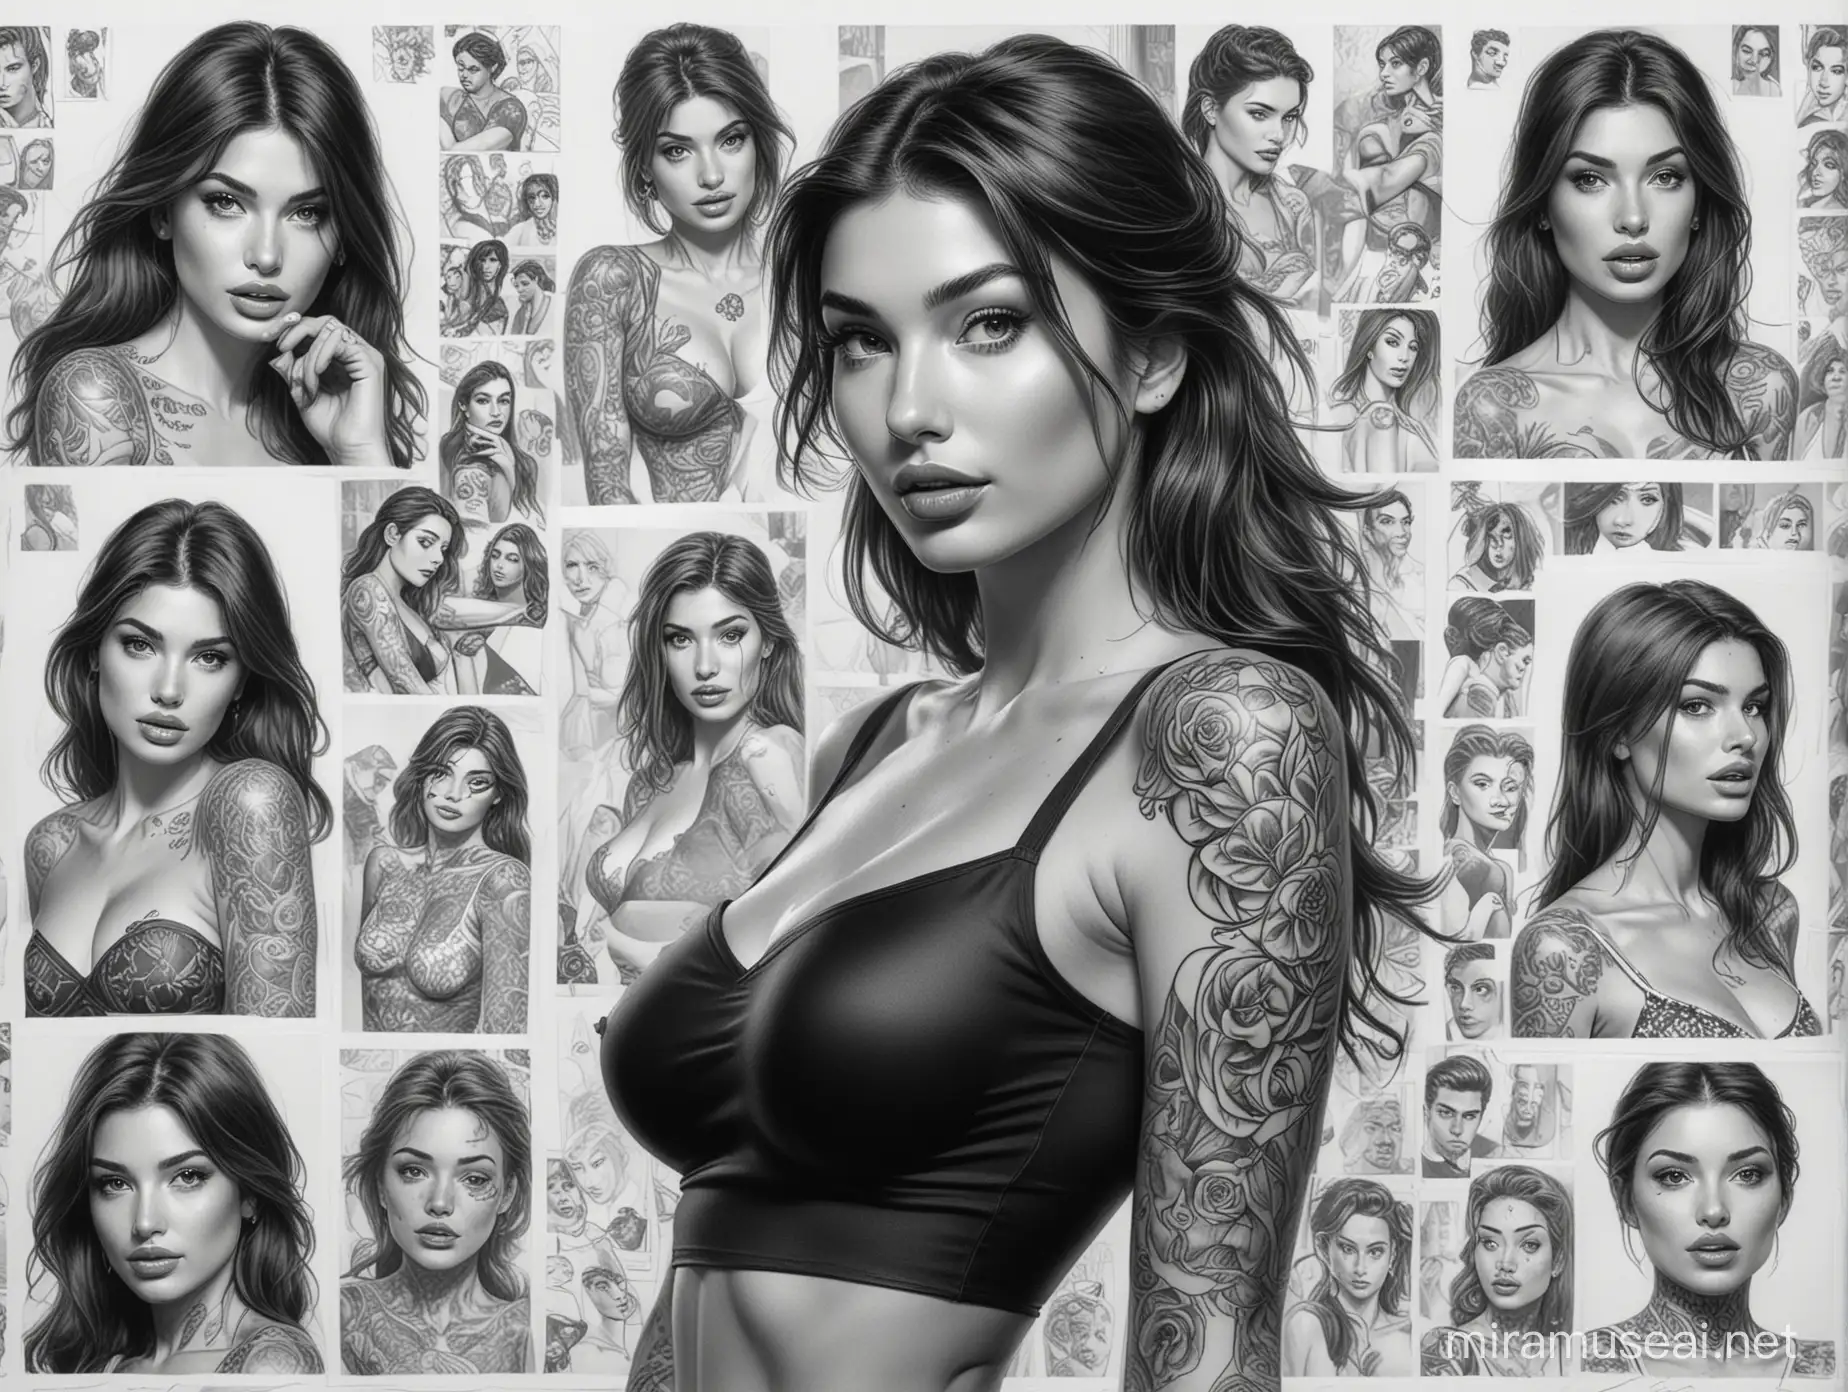 90's comic style, Black and White, Detailed Pencil sketches, Storyboard sheet with rows of Multiple sketches, Portraits of a sexy brunette woman, Camila Morrone, Covered in tattoos, Tiny short black dress, White Background. Zoom out view. Marvel comic style. High resolution.  High contrast.